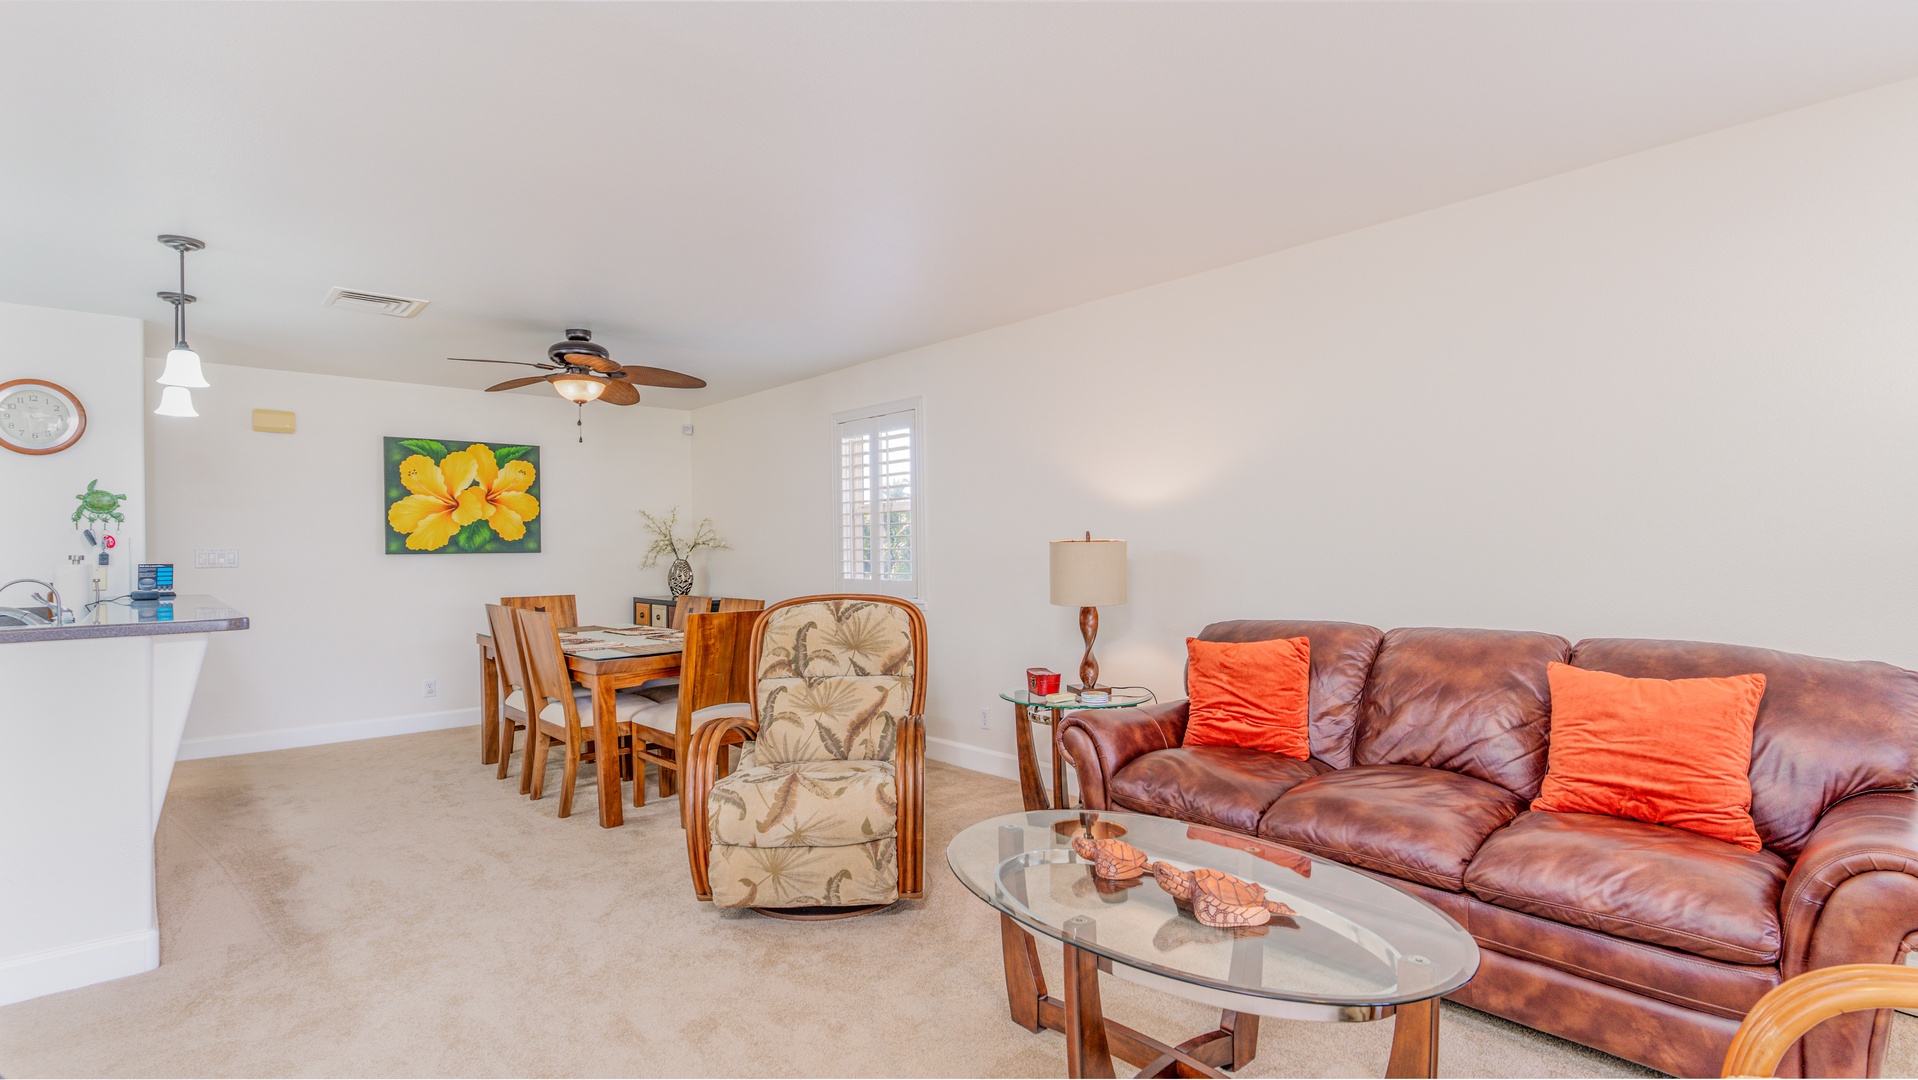 Kapolei Vacation Rentals, Ko Olina Kai 1057B - All the amenities you need for your home away from home.